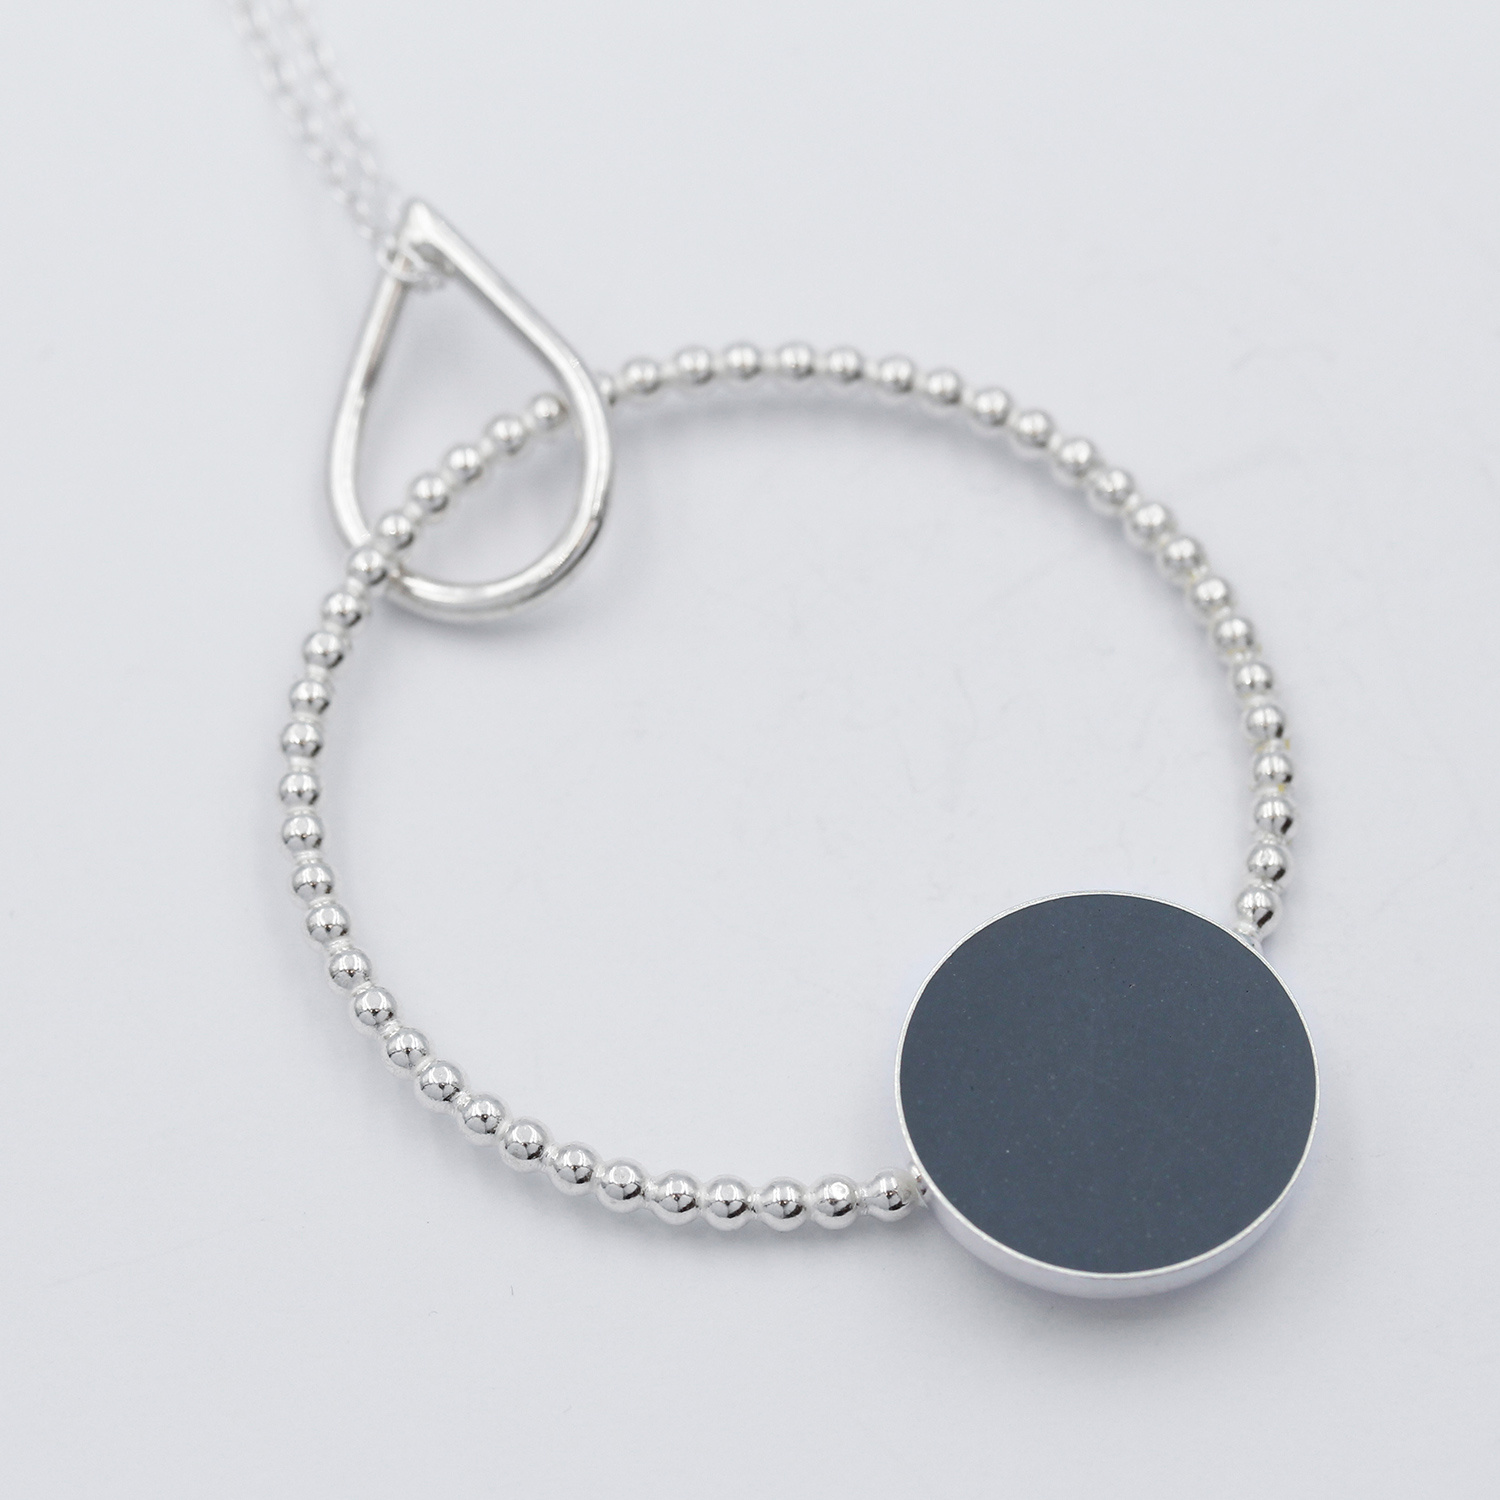 Pendant, dotty grey circle by Claire Lowe